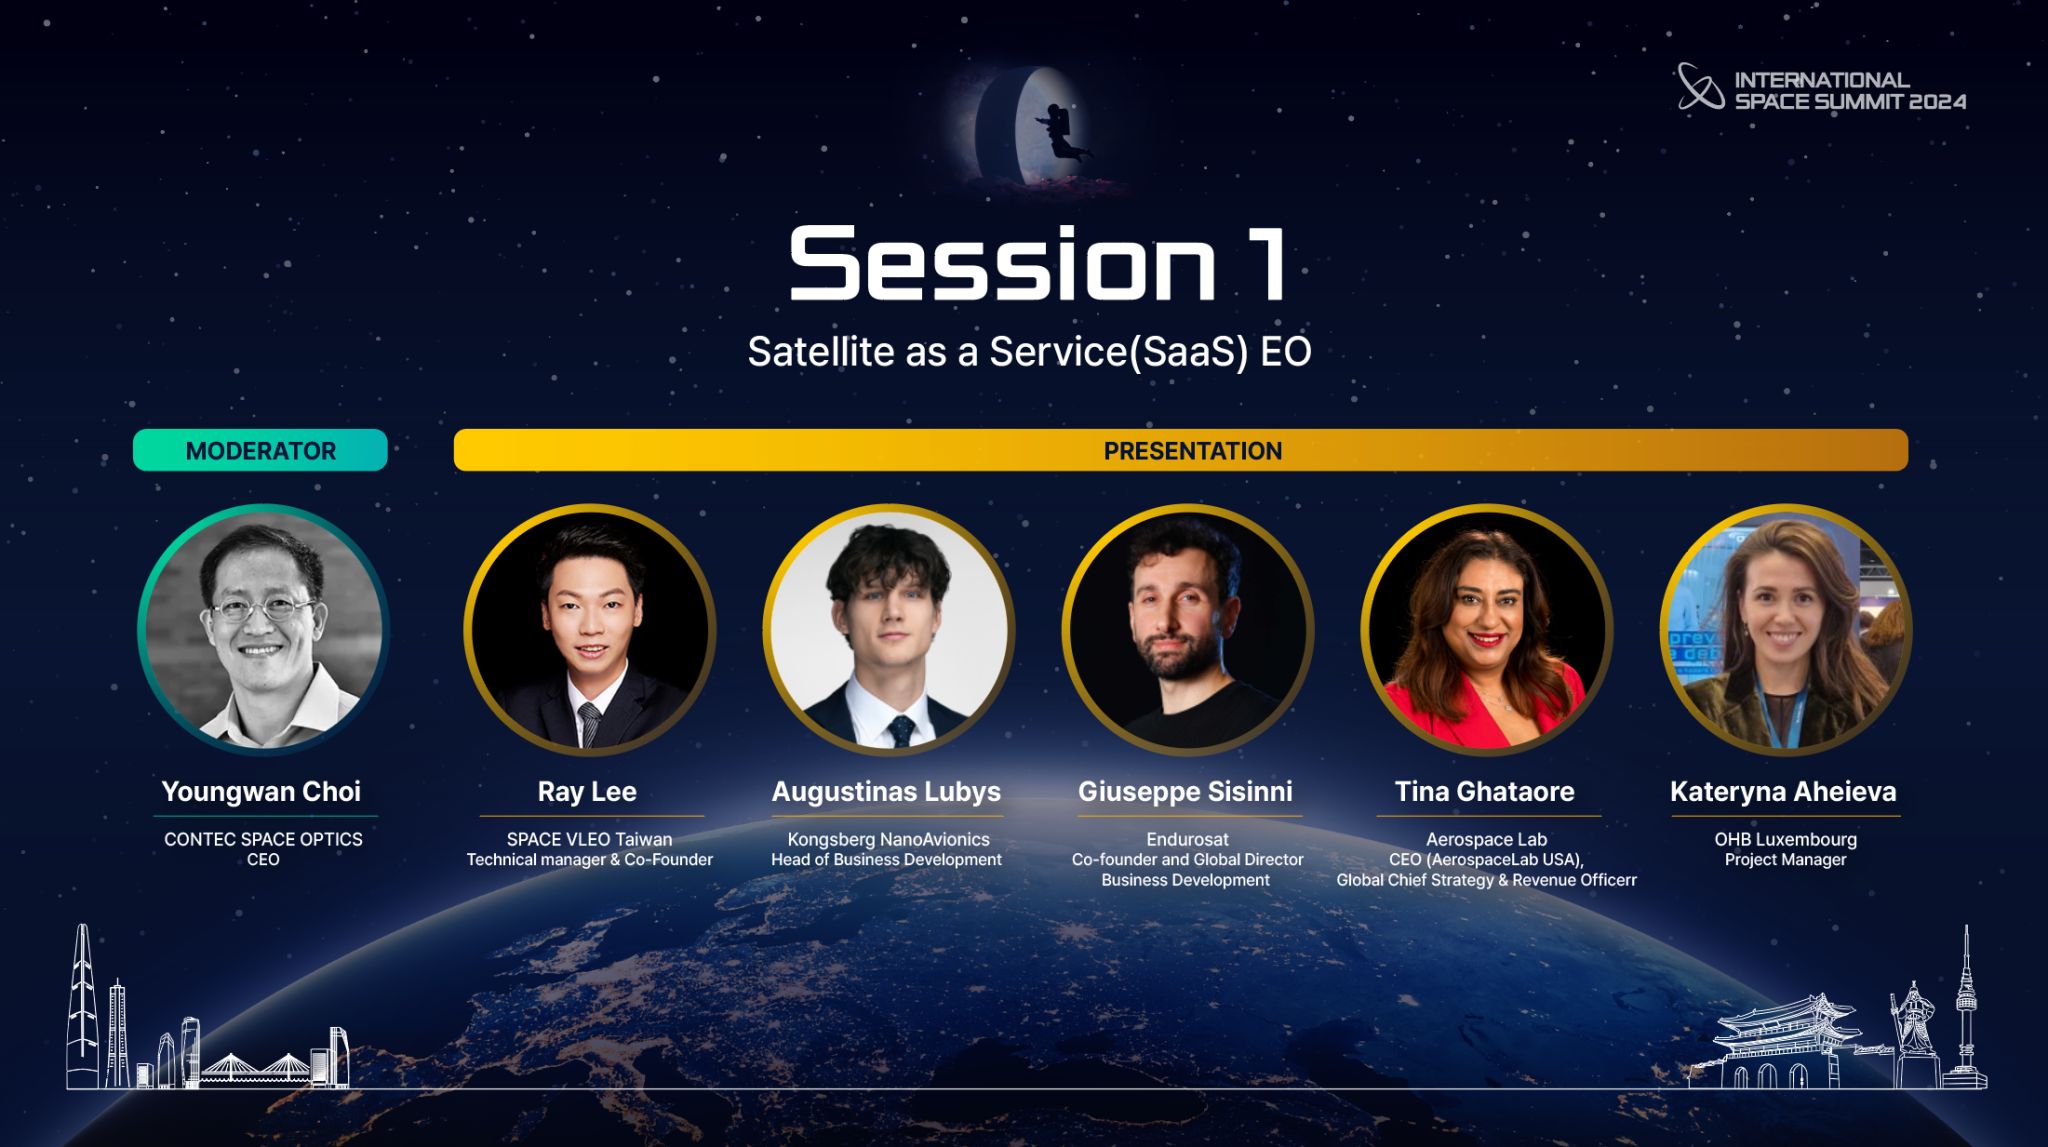 SPACEVLEO will be joining the lineup for ISS 2024, Session 1: "Satellite as a Service (SaaS) EO".